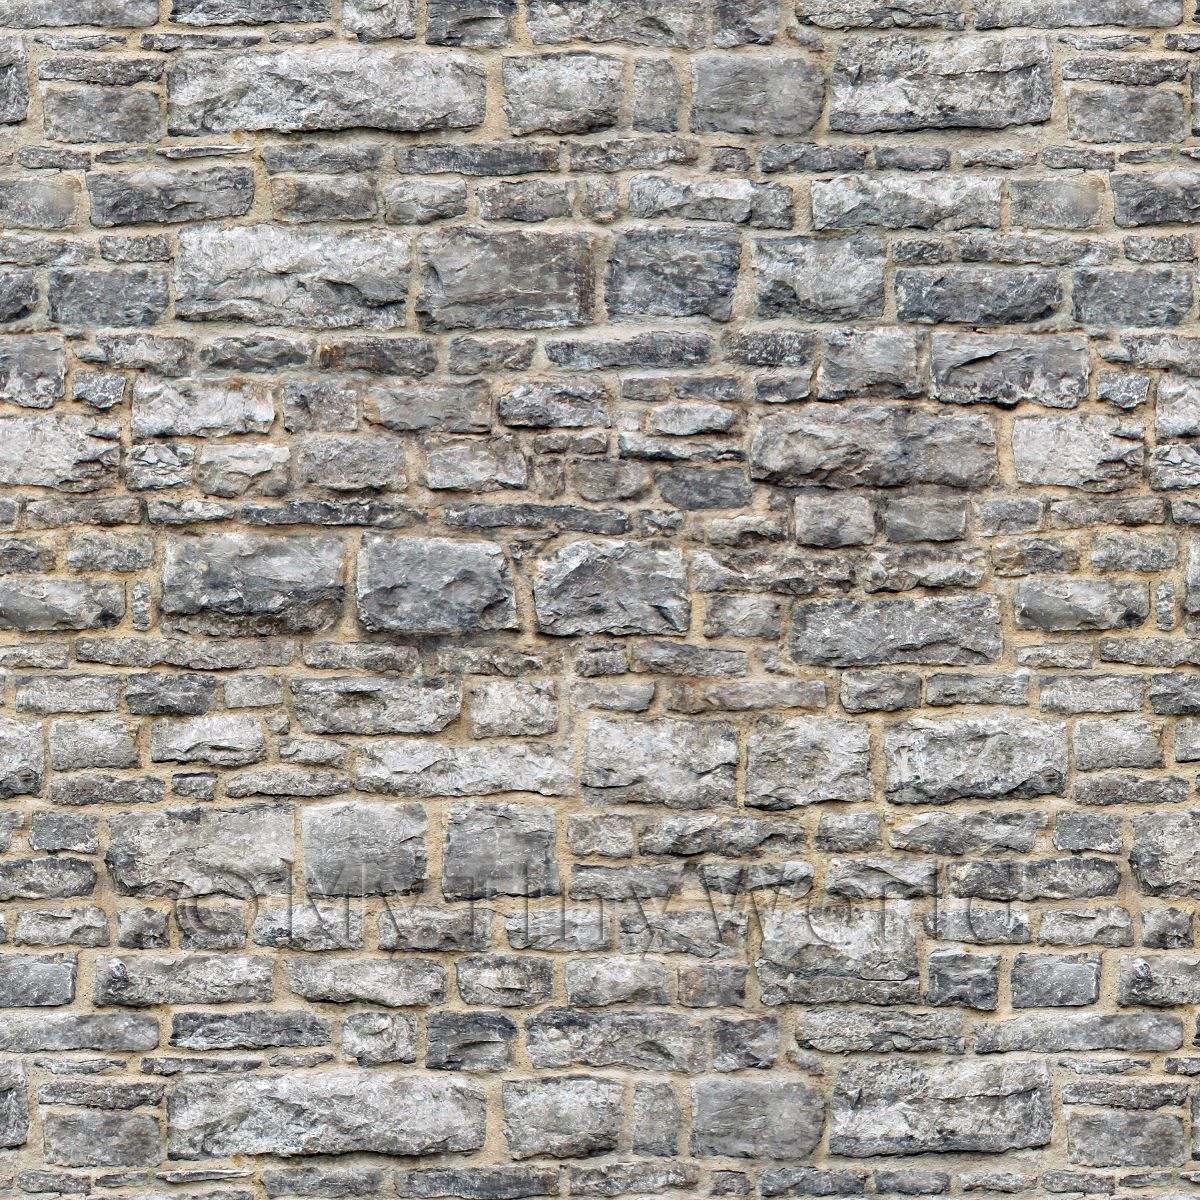 And Brick Papers Dolls House Miniature Grey Stone Wall Pattern